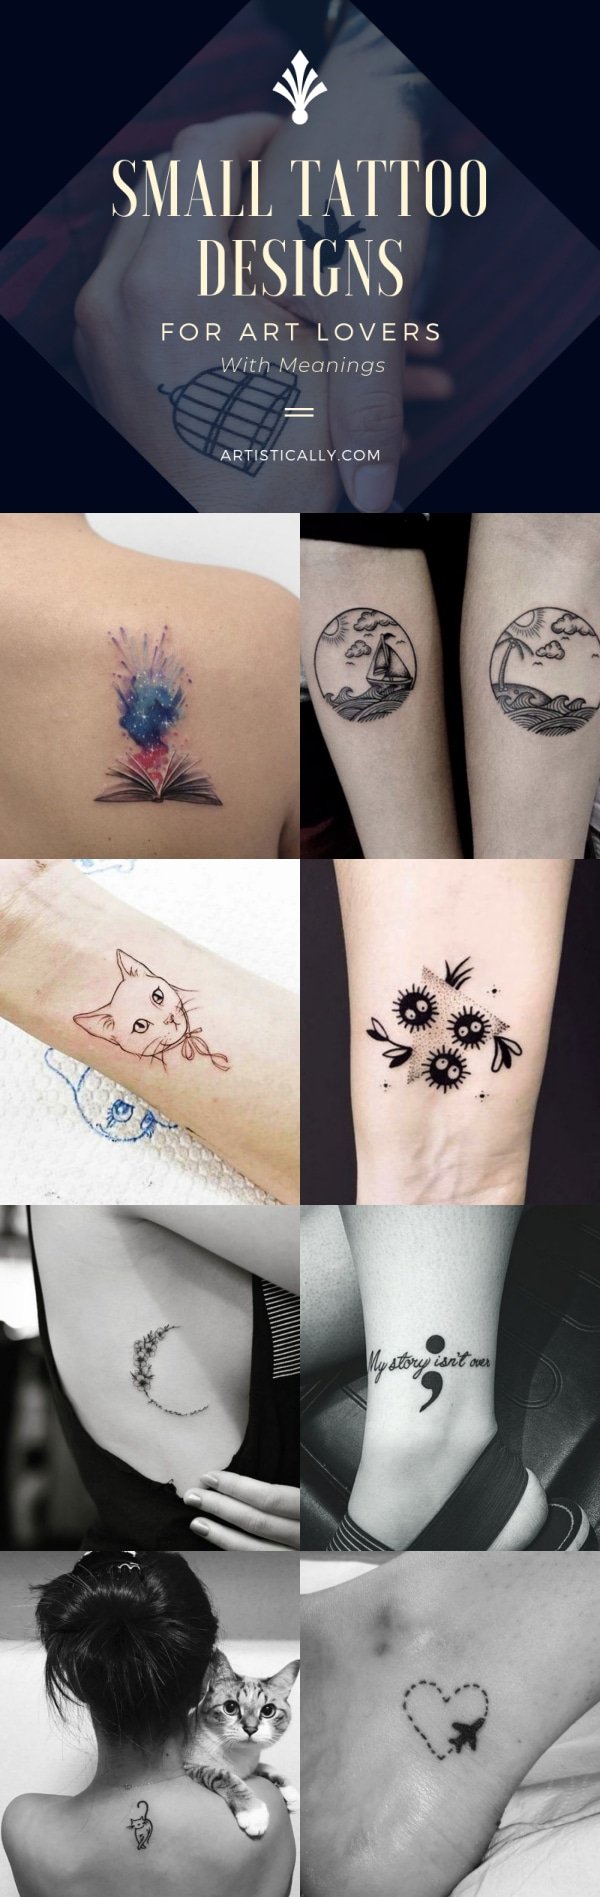 30 Small Tattoo Designs for Art Lovers with Meanings